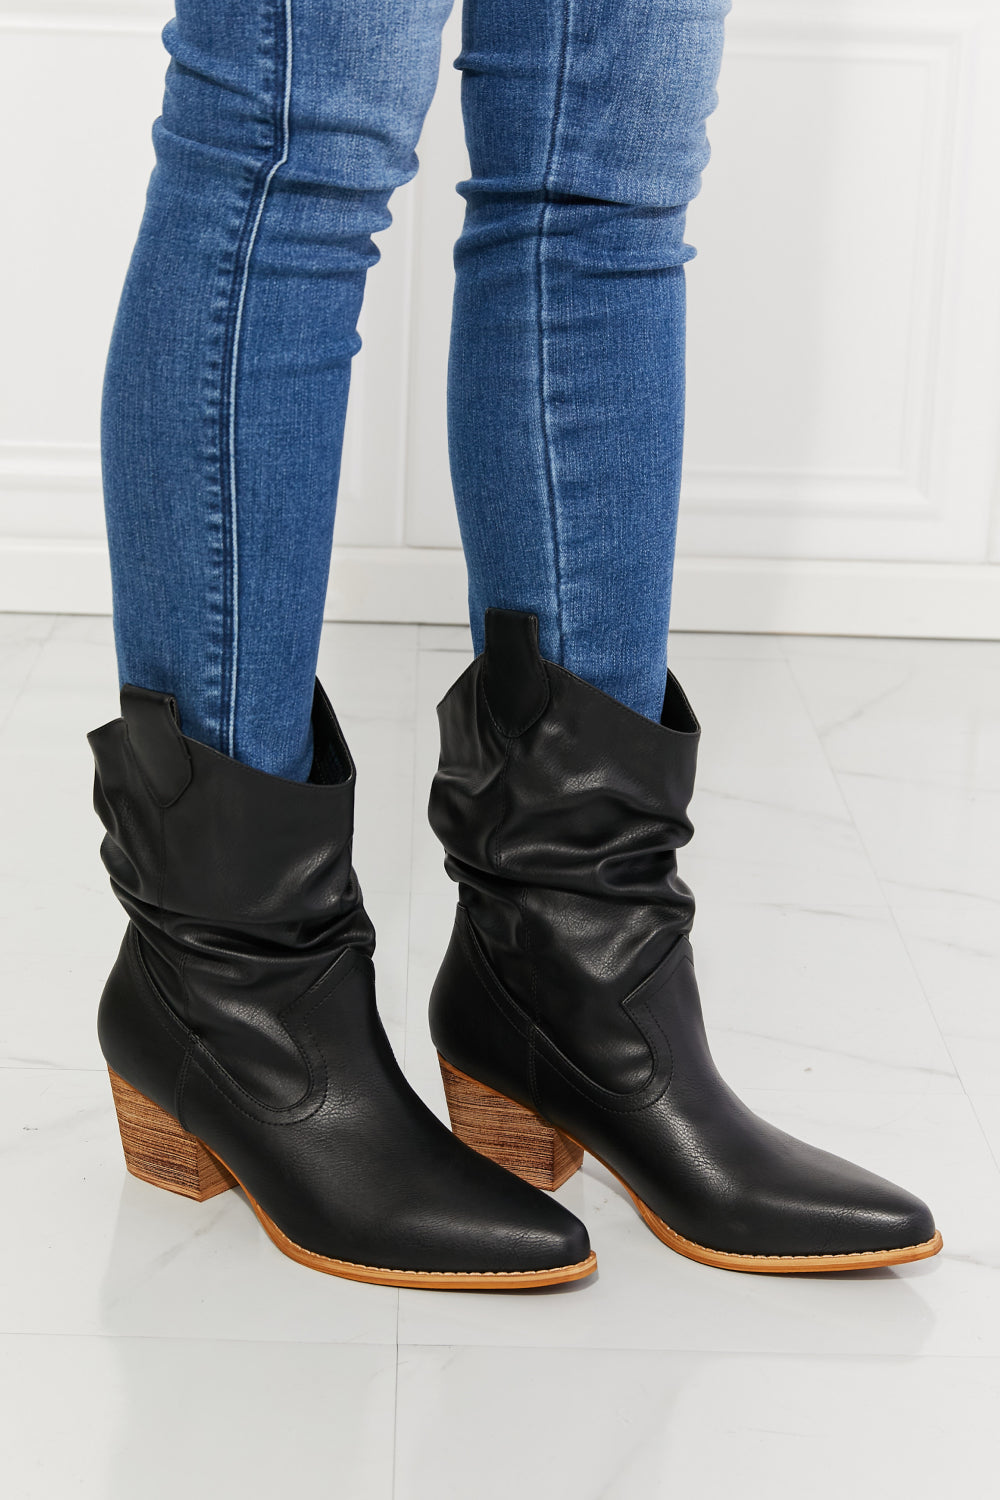 MMShoes Better in Texas Scrunch Cowboy Boots in Black - nailedmoms